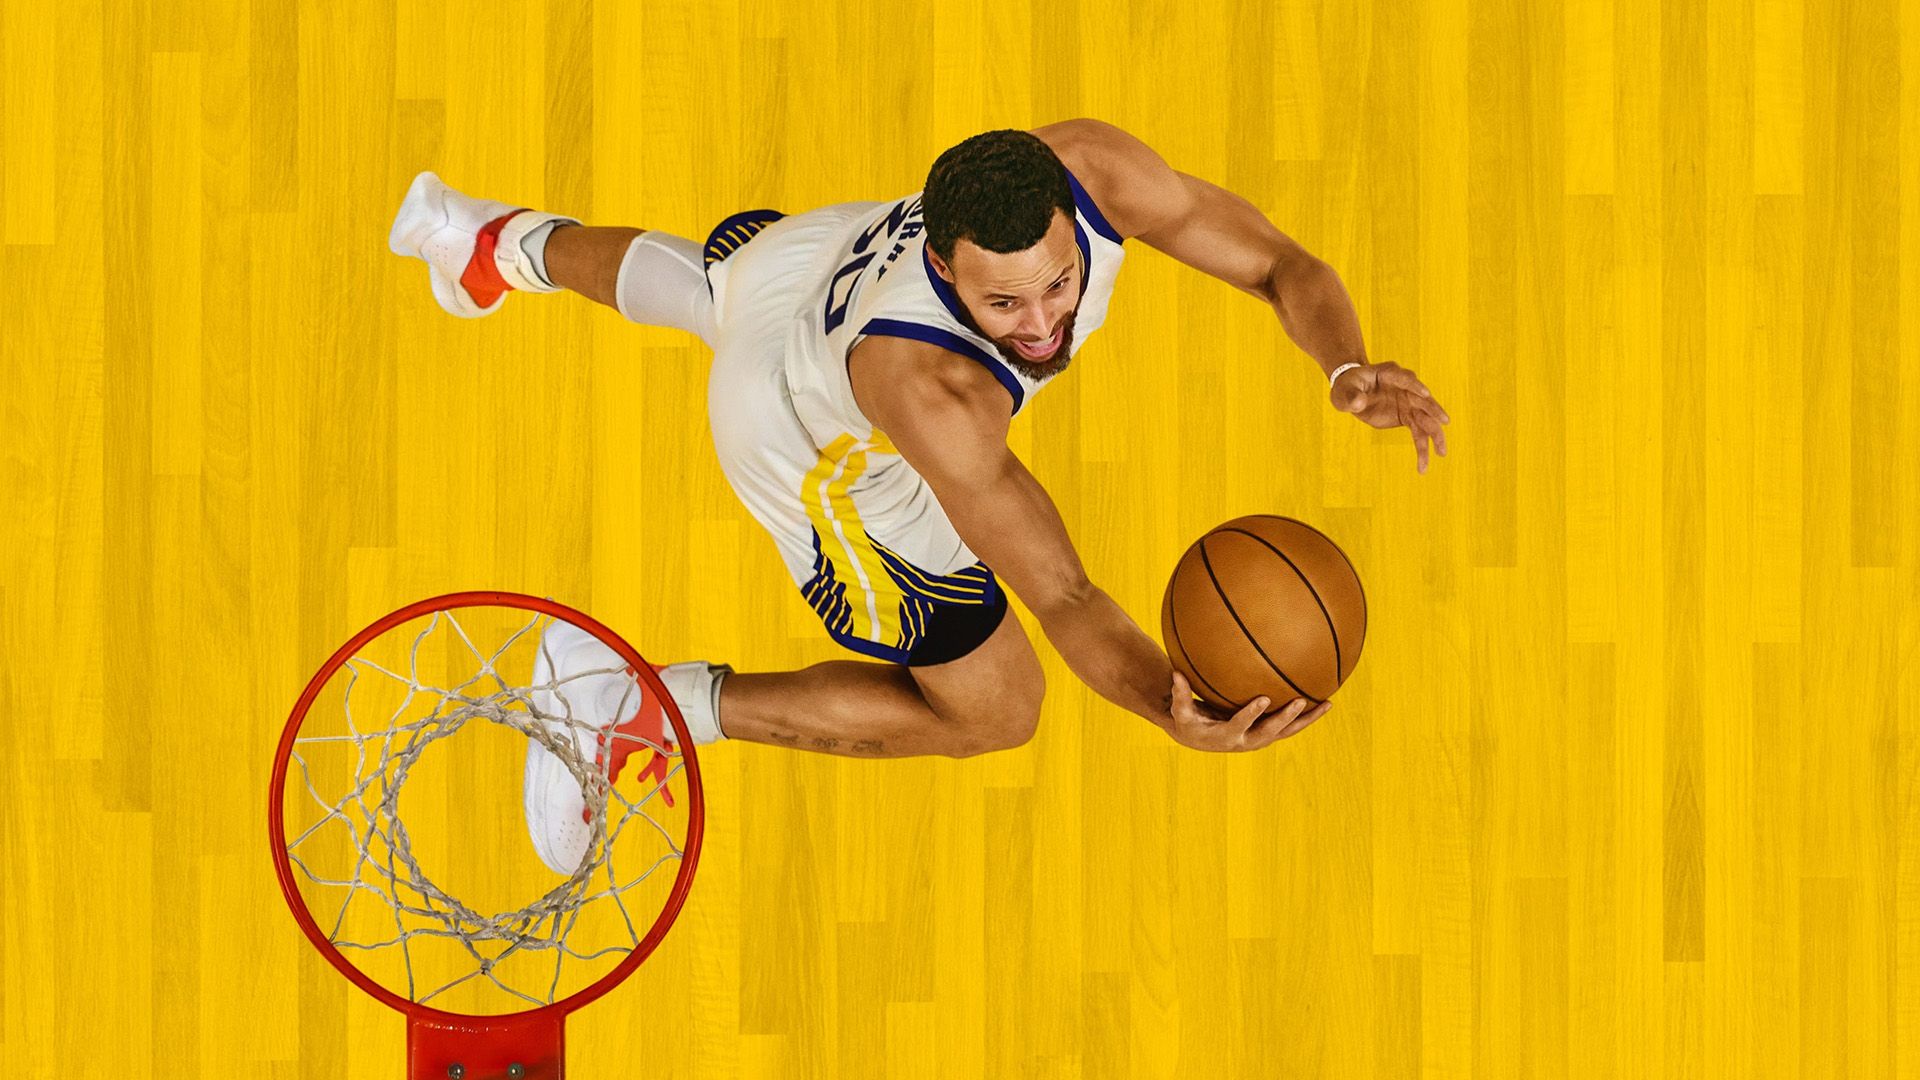 Stephen Curry: Underrated background